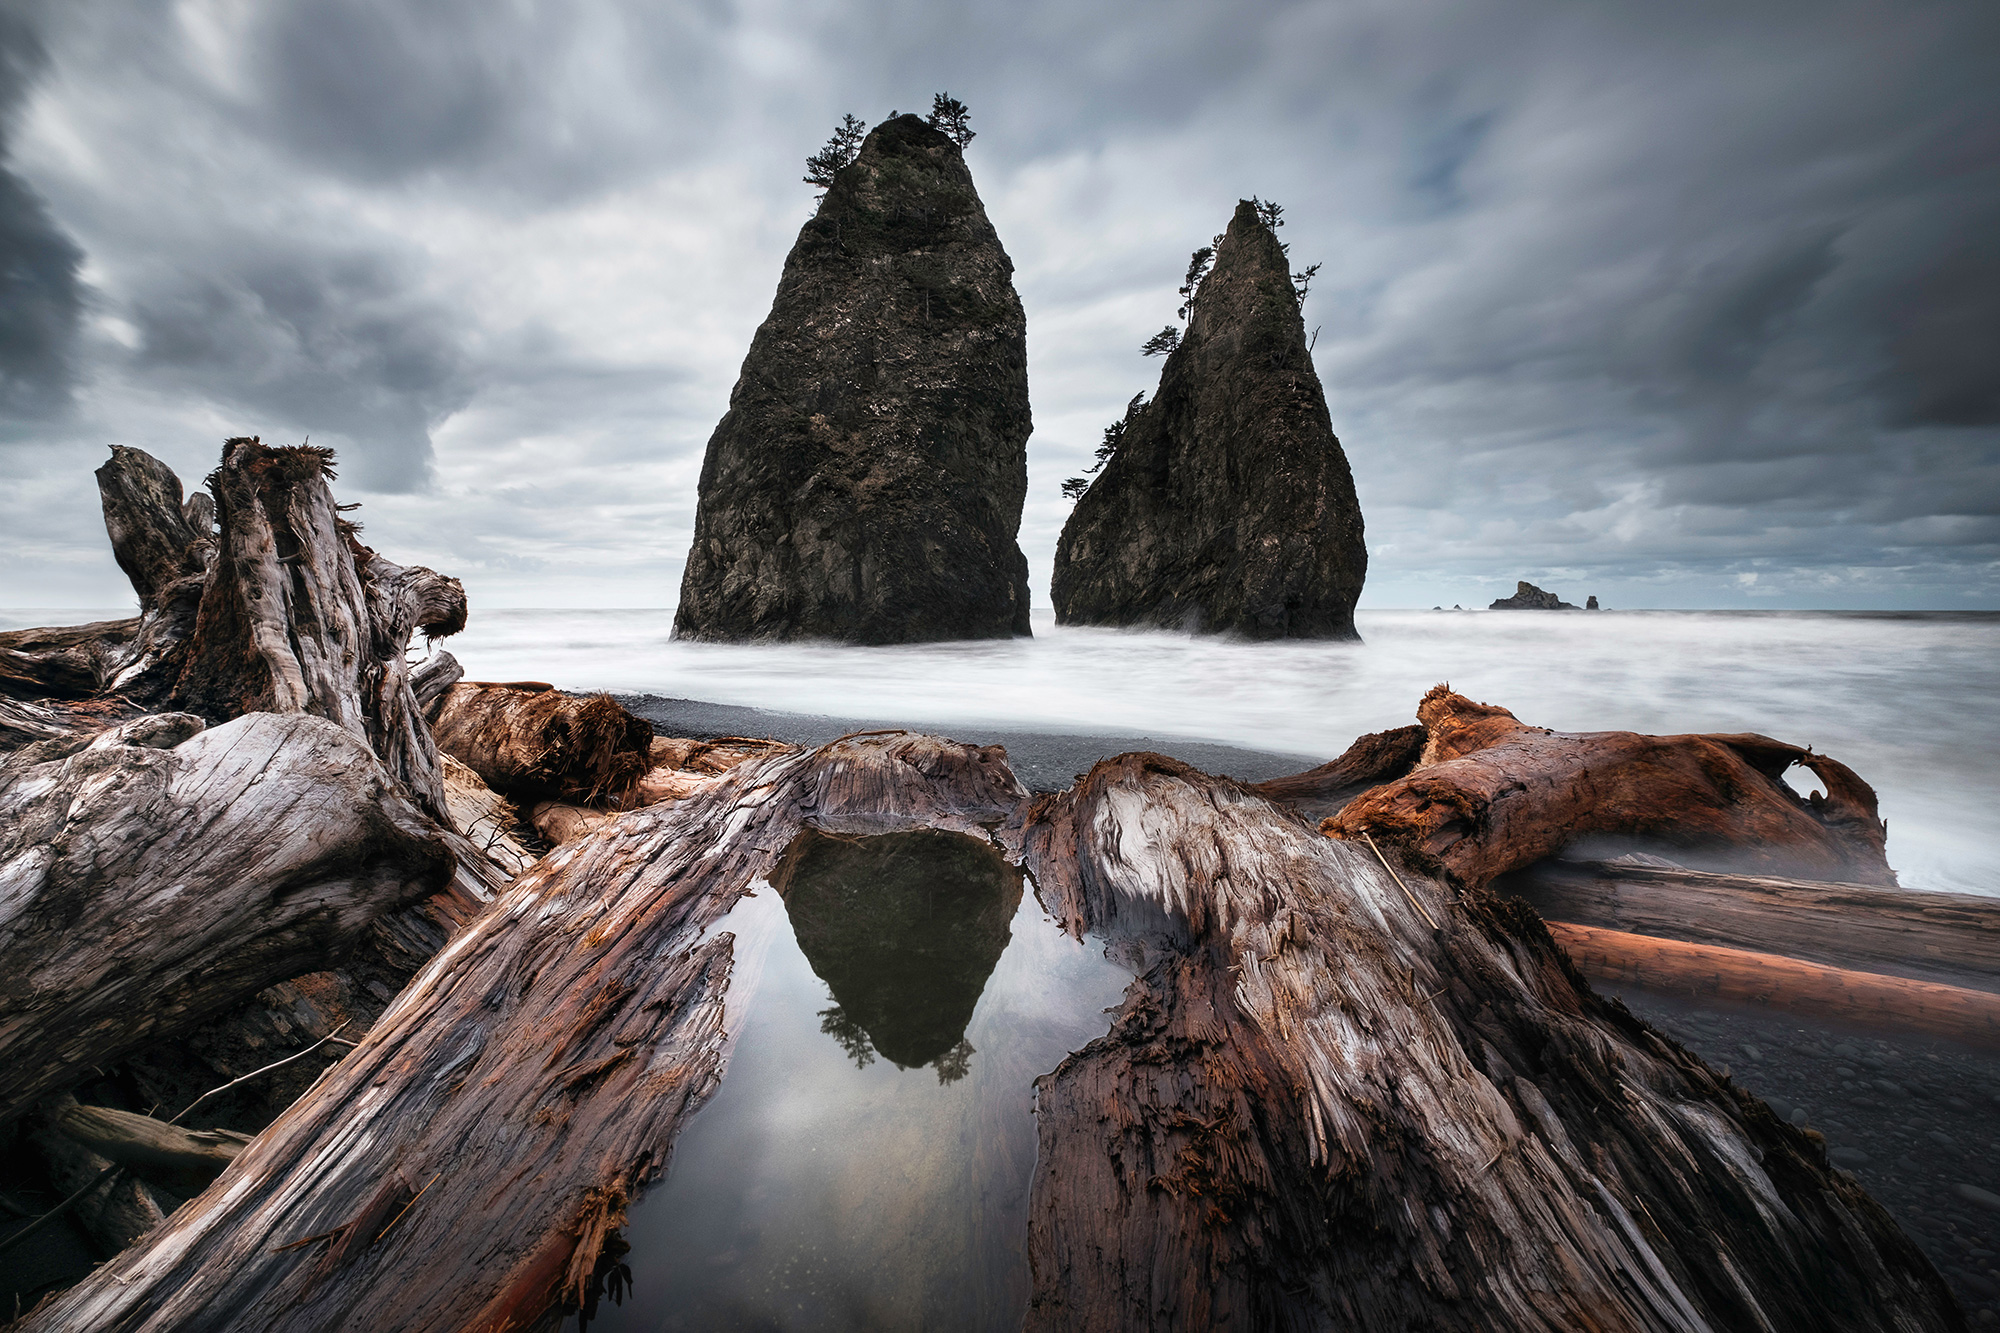 Premium/ “Dealing with the unknown is a big part of landscape photography.”